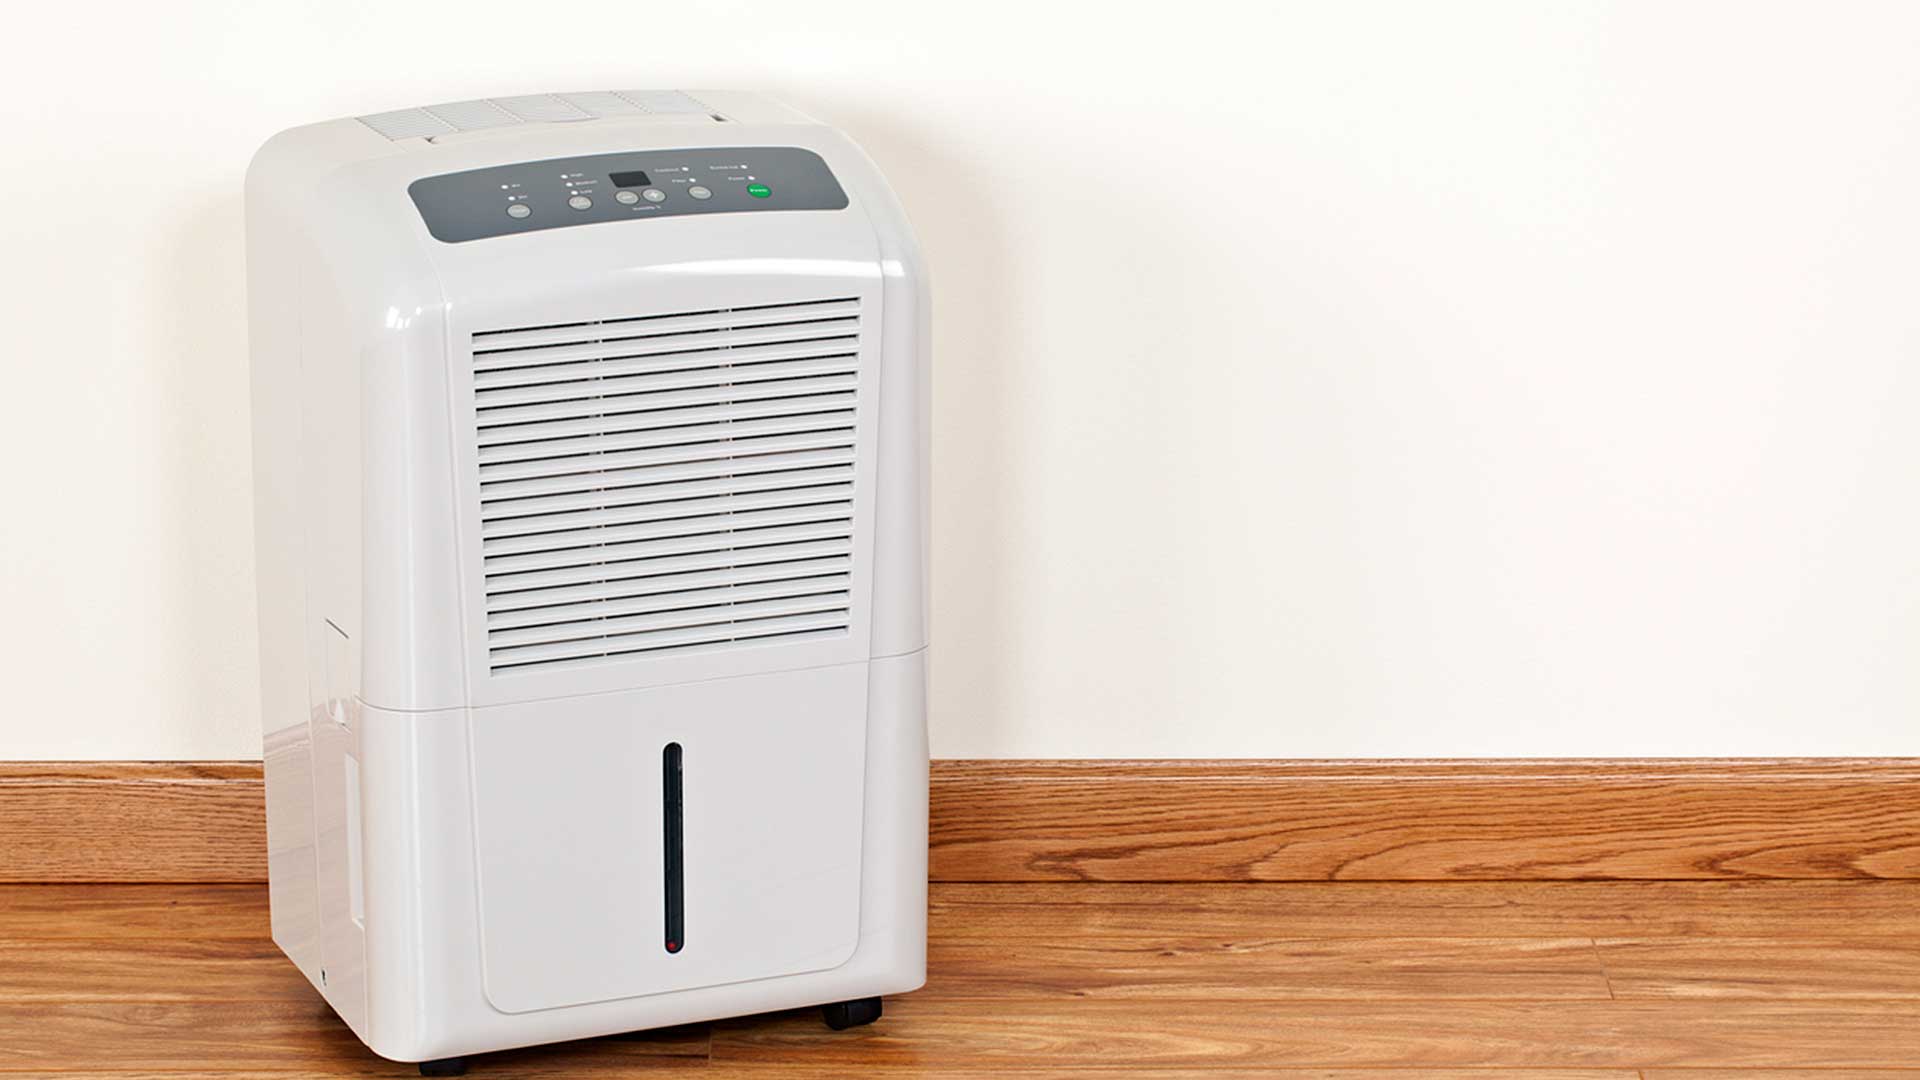 Solid Rock Inspections Group, Tampa Bay, Florida, Dehumidifier for your home